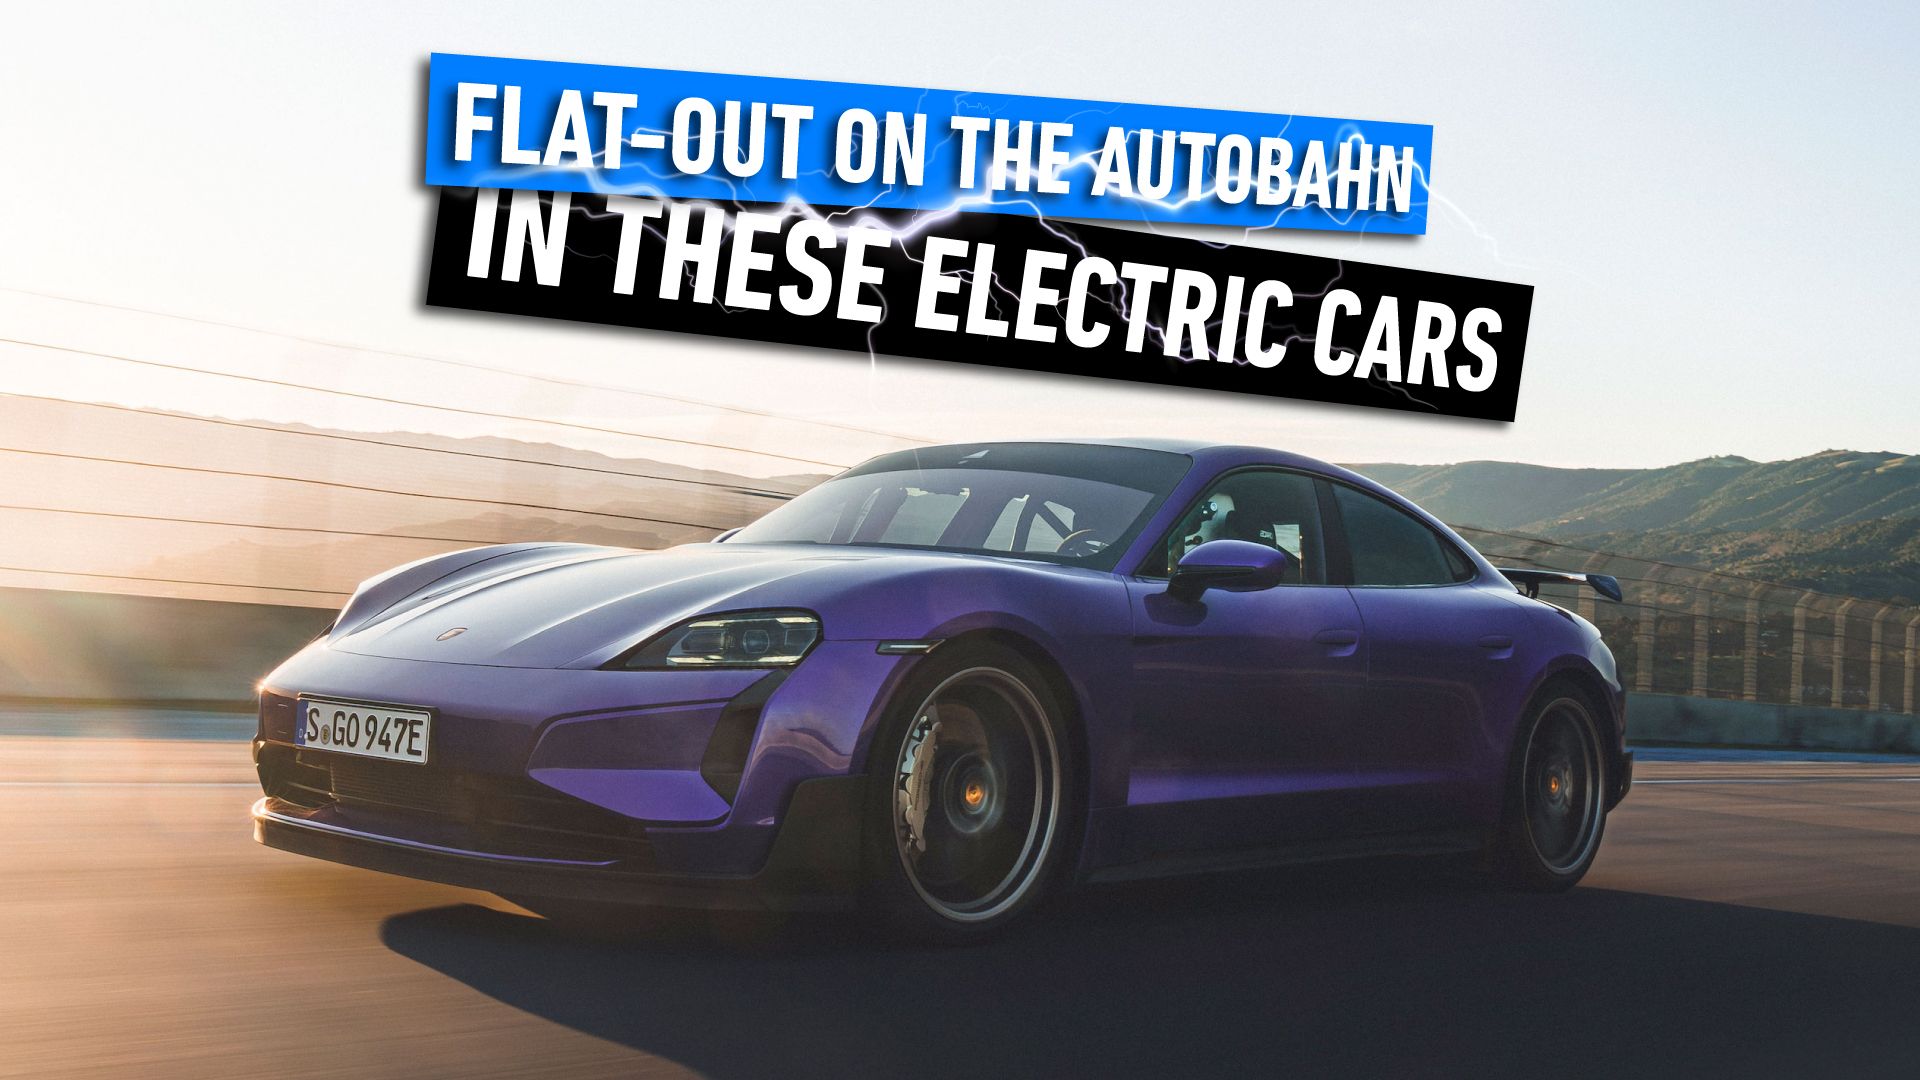 Electric-Cars-We'd-Love-To-Take-Flat-Out-On-The-Autobahn